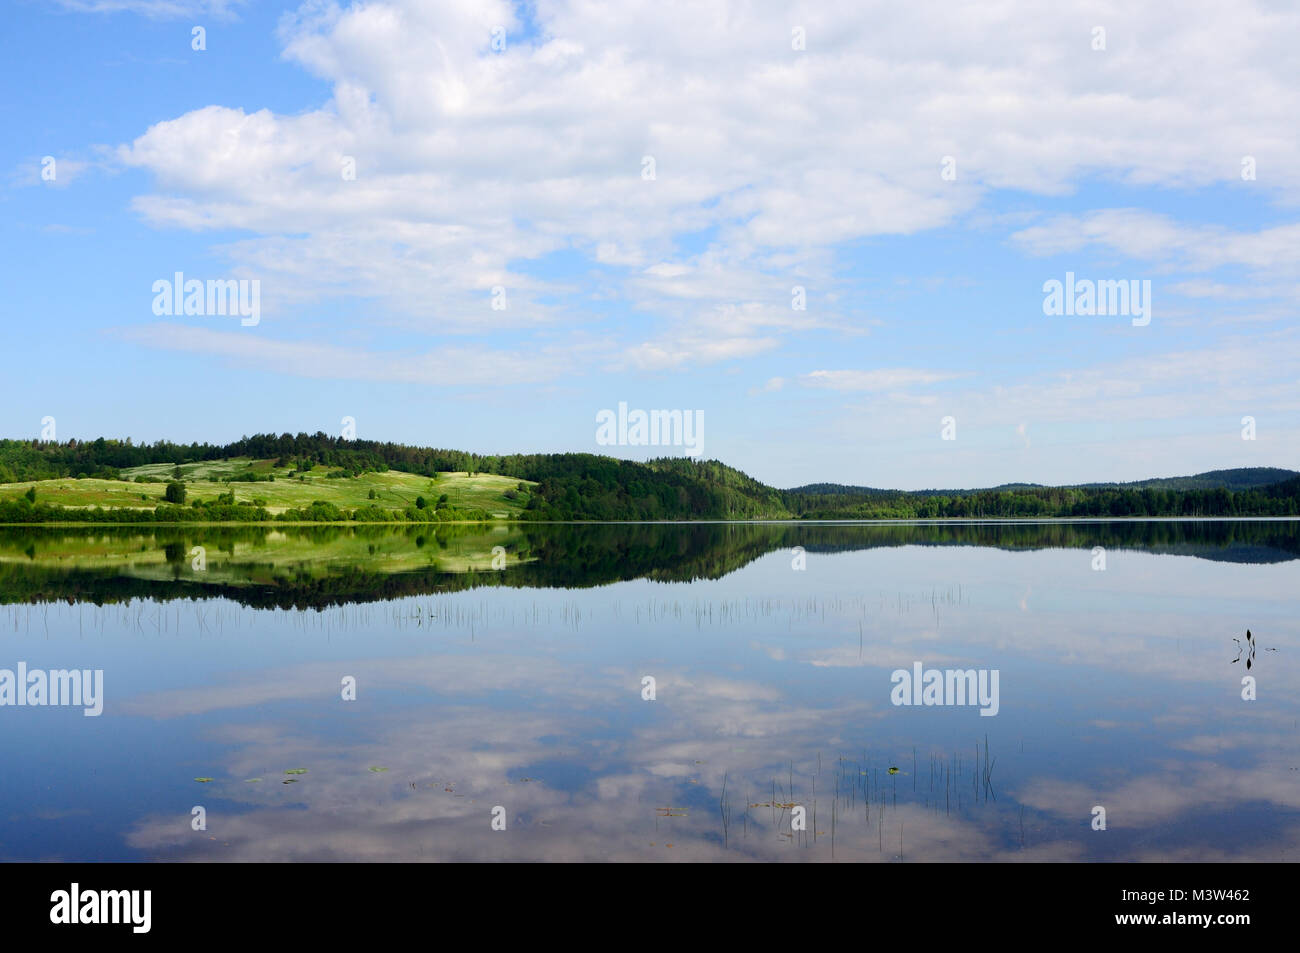 Sky and shore reflected in the mirrored surface of the lake Stock Photo